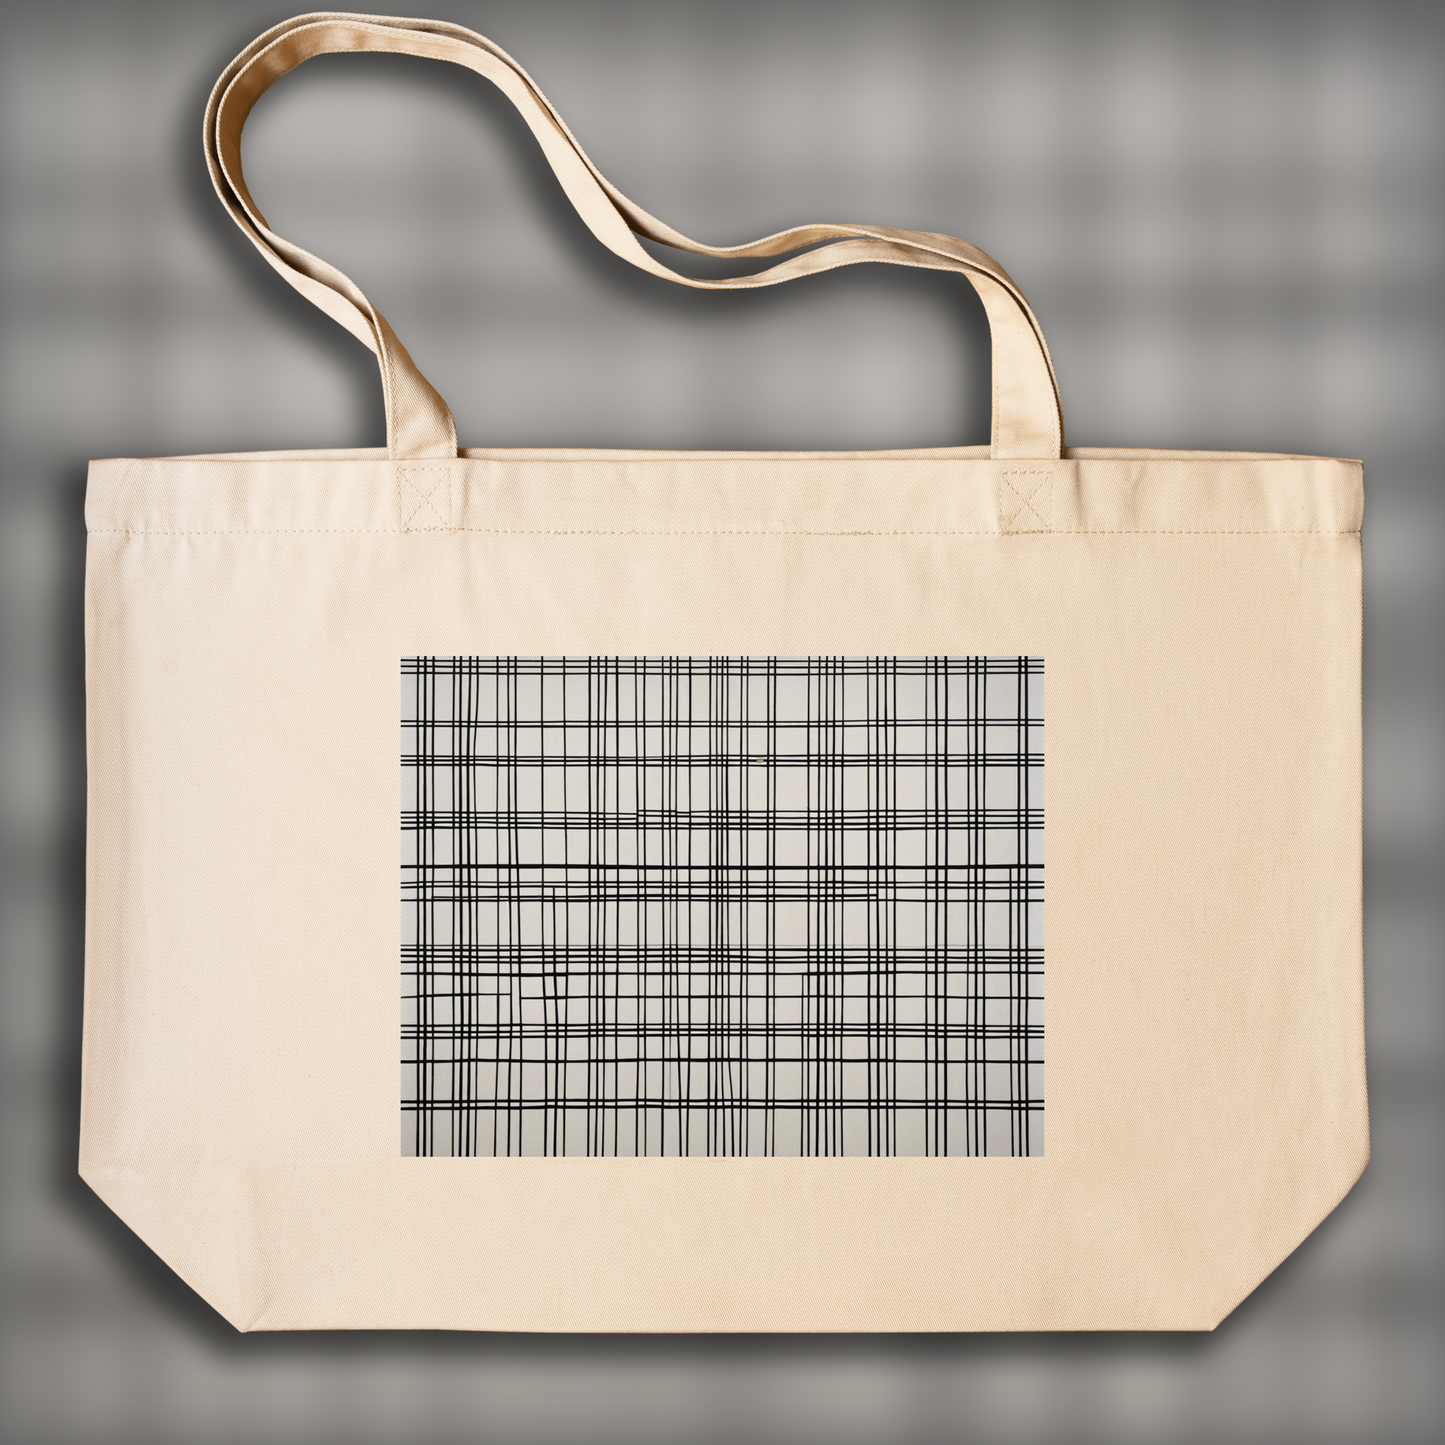 Tote bag ample - Expressionisme abstrait canadien, lines - 3291873611